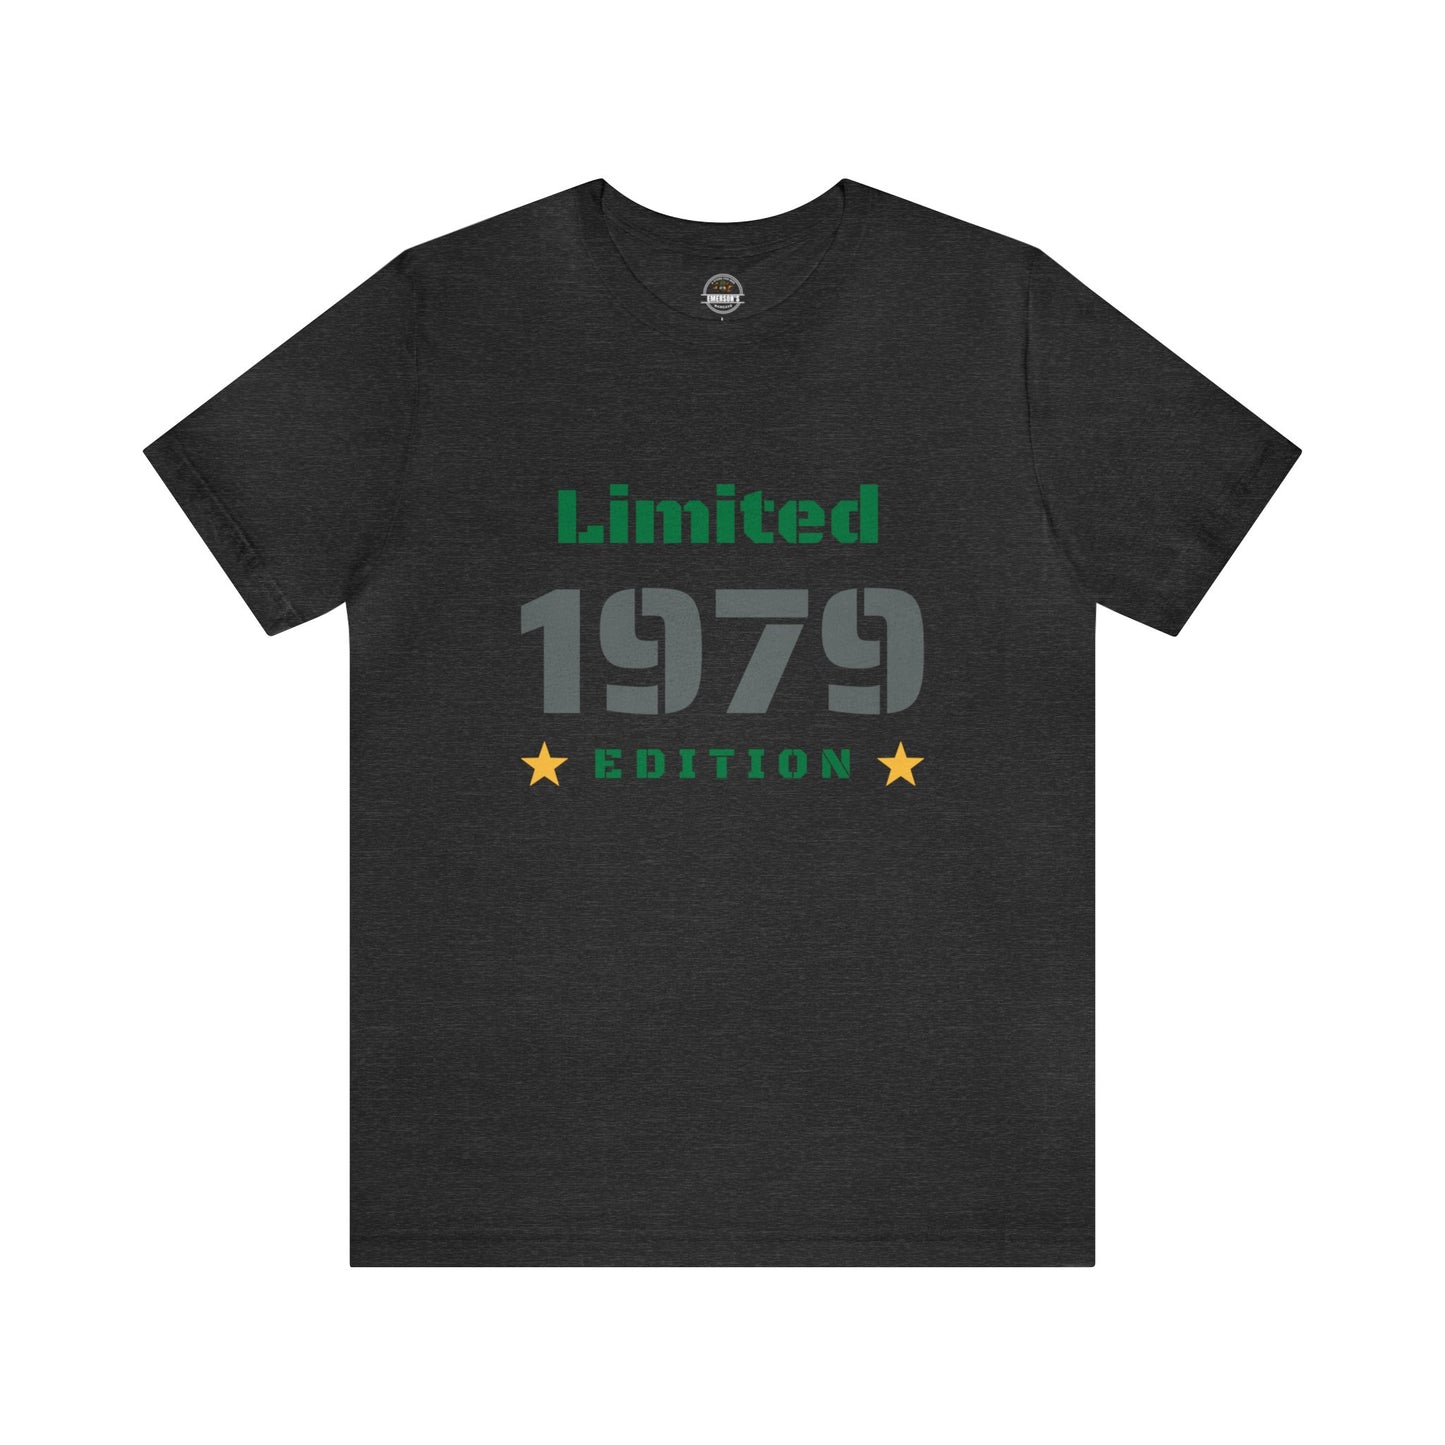 Limited Edition 1979 T-shirt